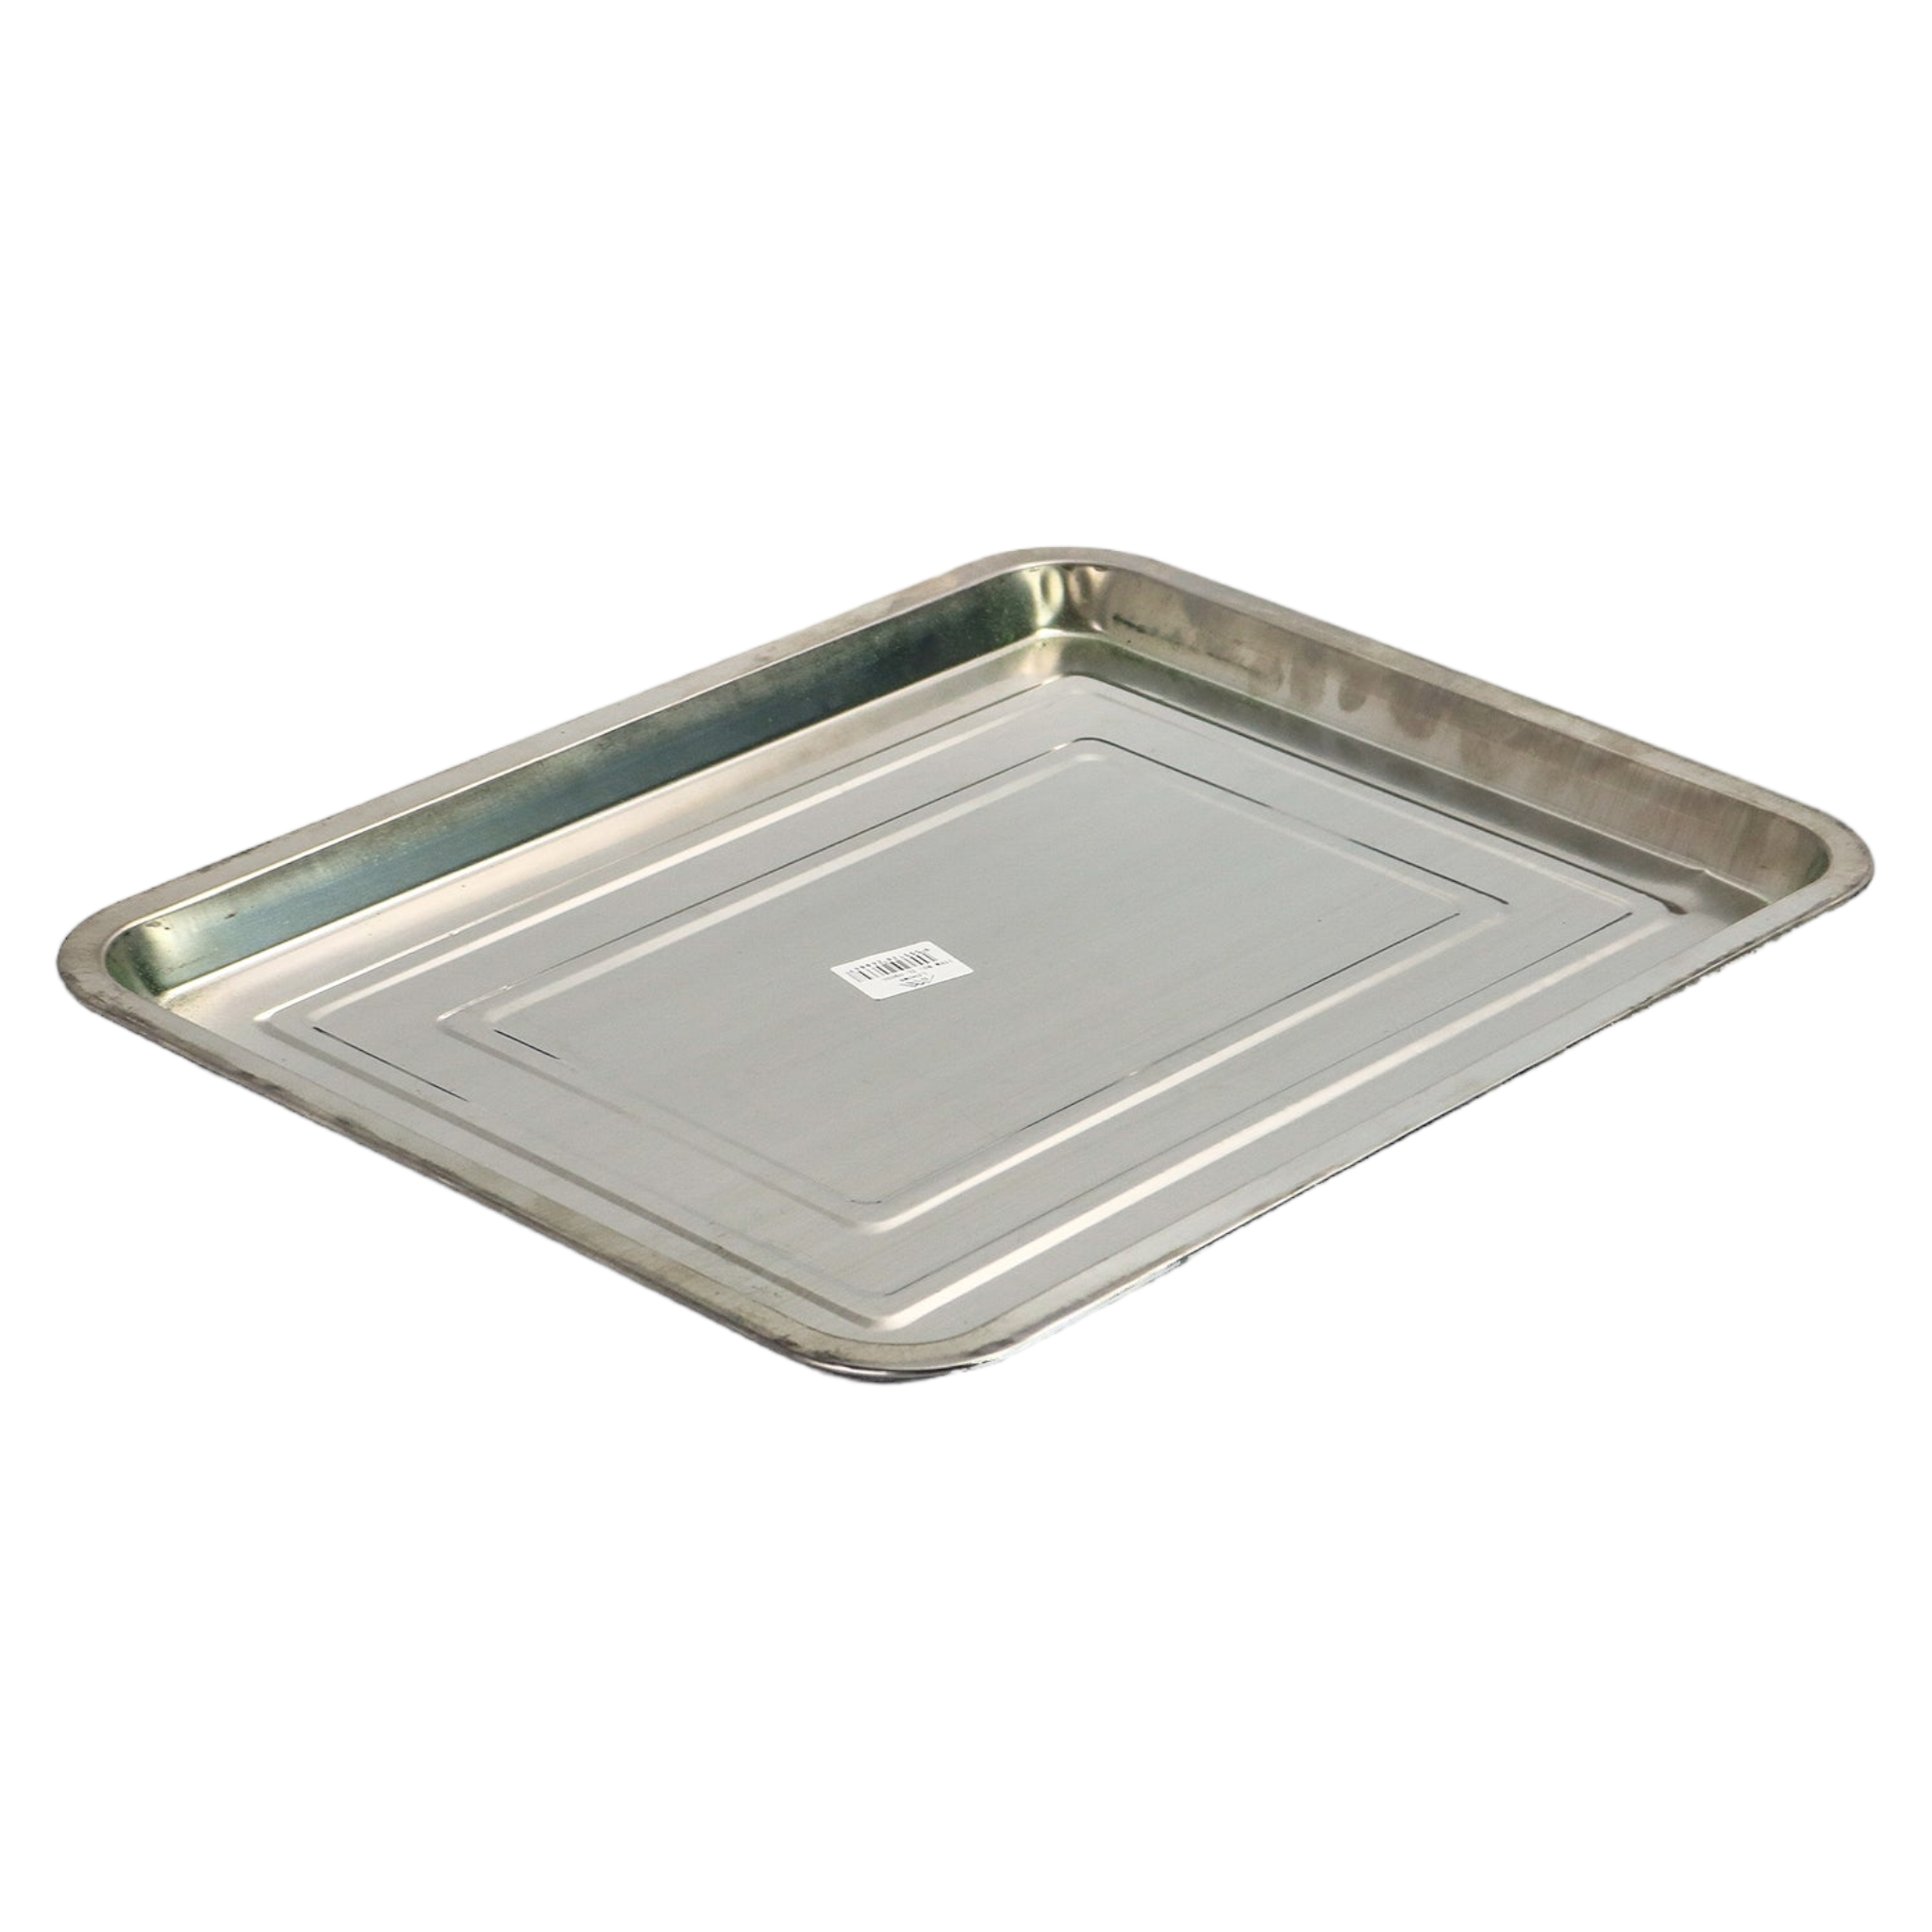 Serving Tray 30x40cm Stainless Steel